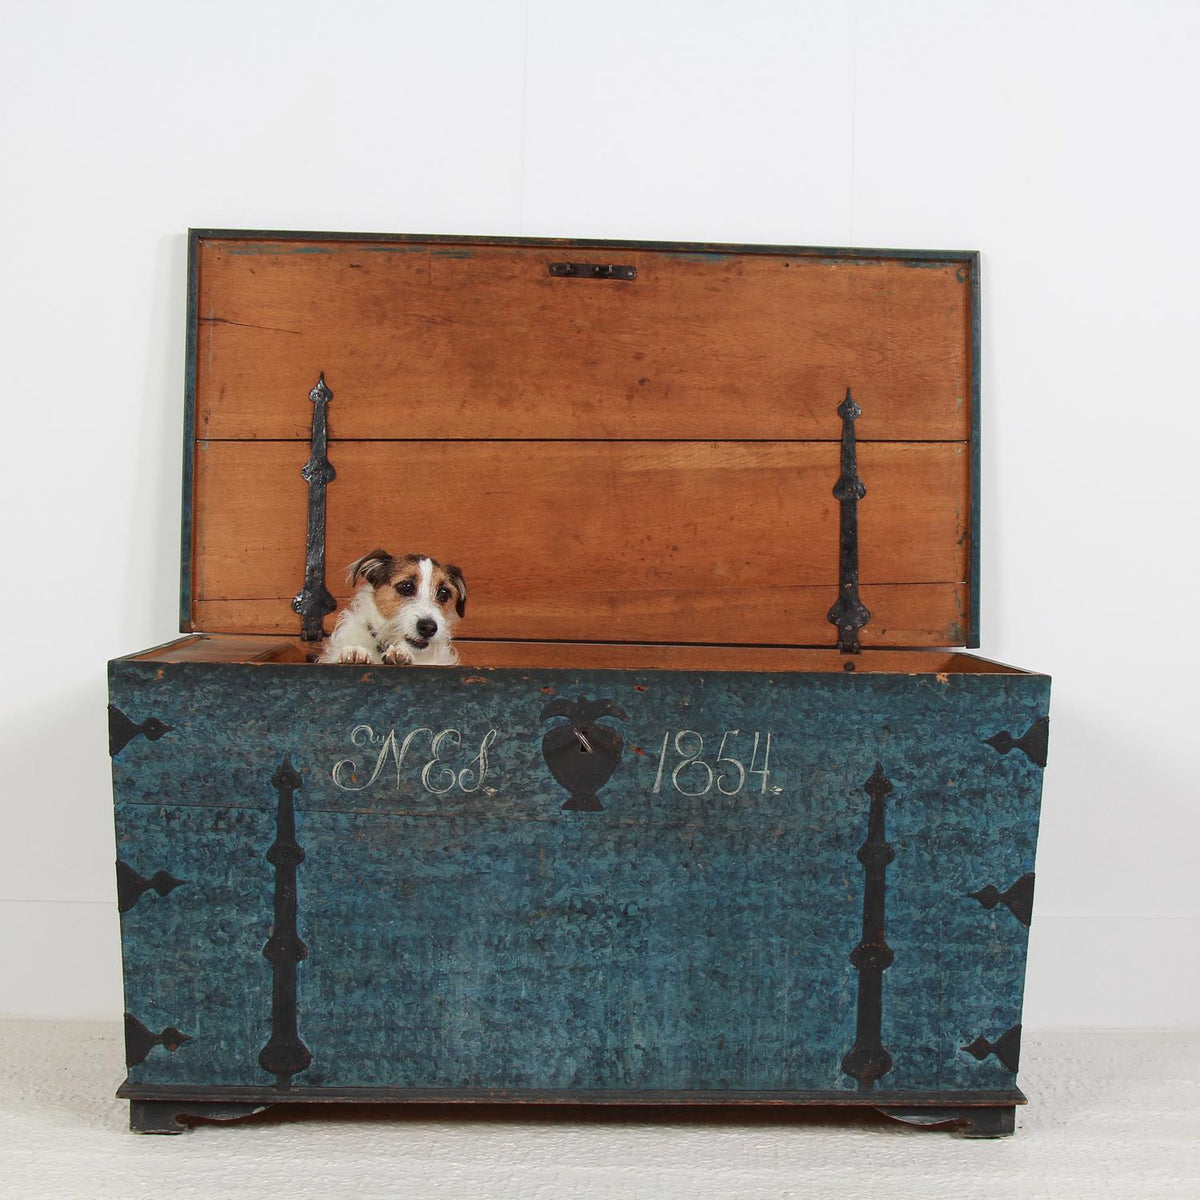 Exceptional Swedish Oak Marraige Trunk Monogrammed and Dated 1854